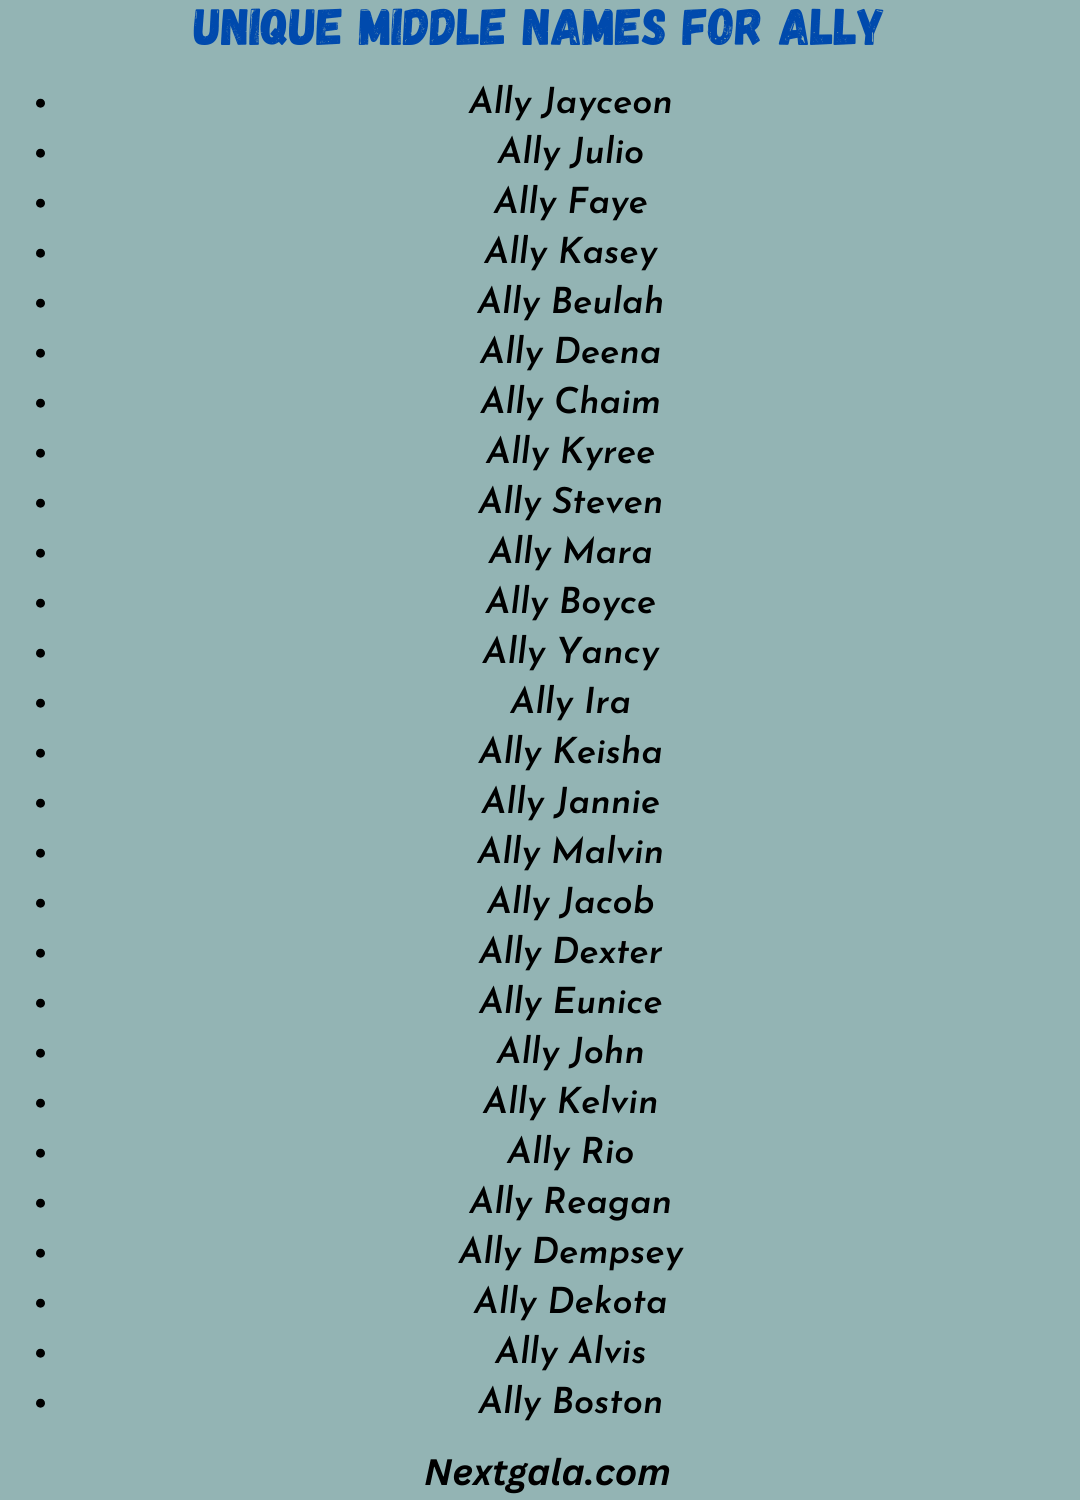 Unique Middle Names for Ally